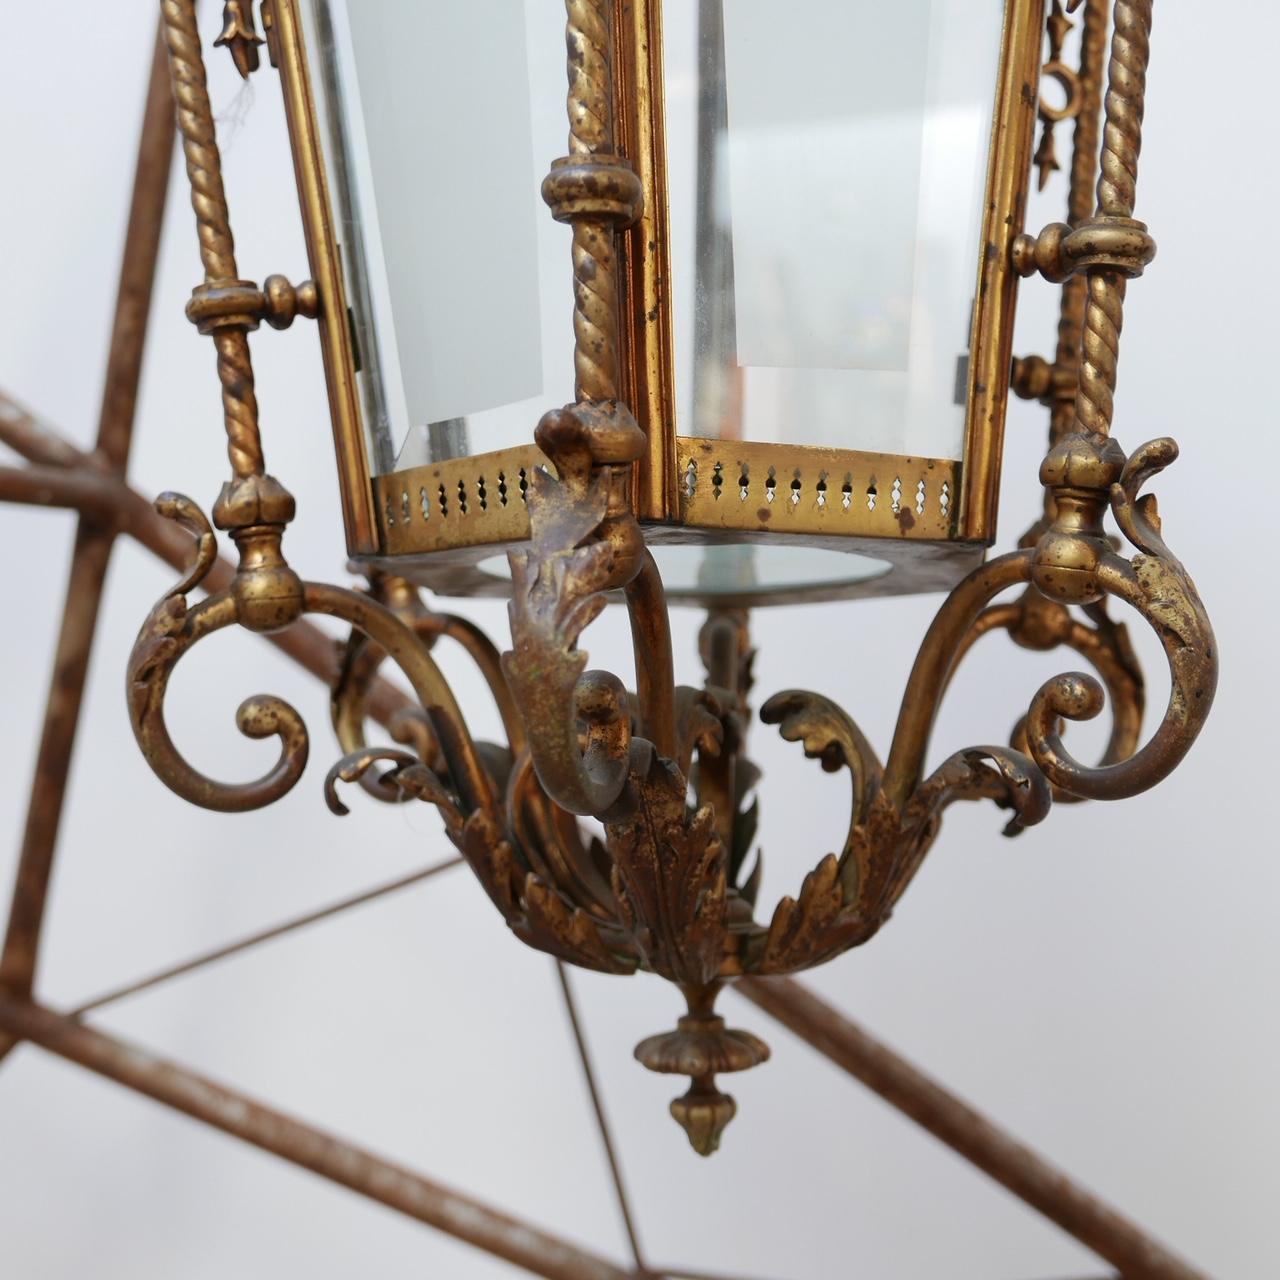 A decorative antique lantern.

Dutch, circa 1900.

The decorative ceiling rose and chain were retained, the rose being particularly attractive.

Etched glass sides (two are later replacements).

One decorative finial above the glass lacking